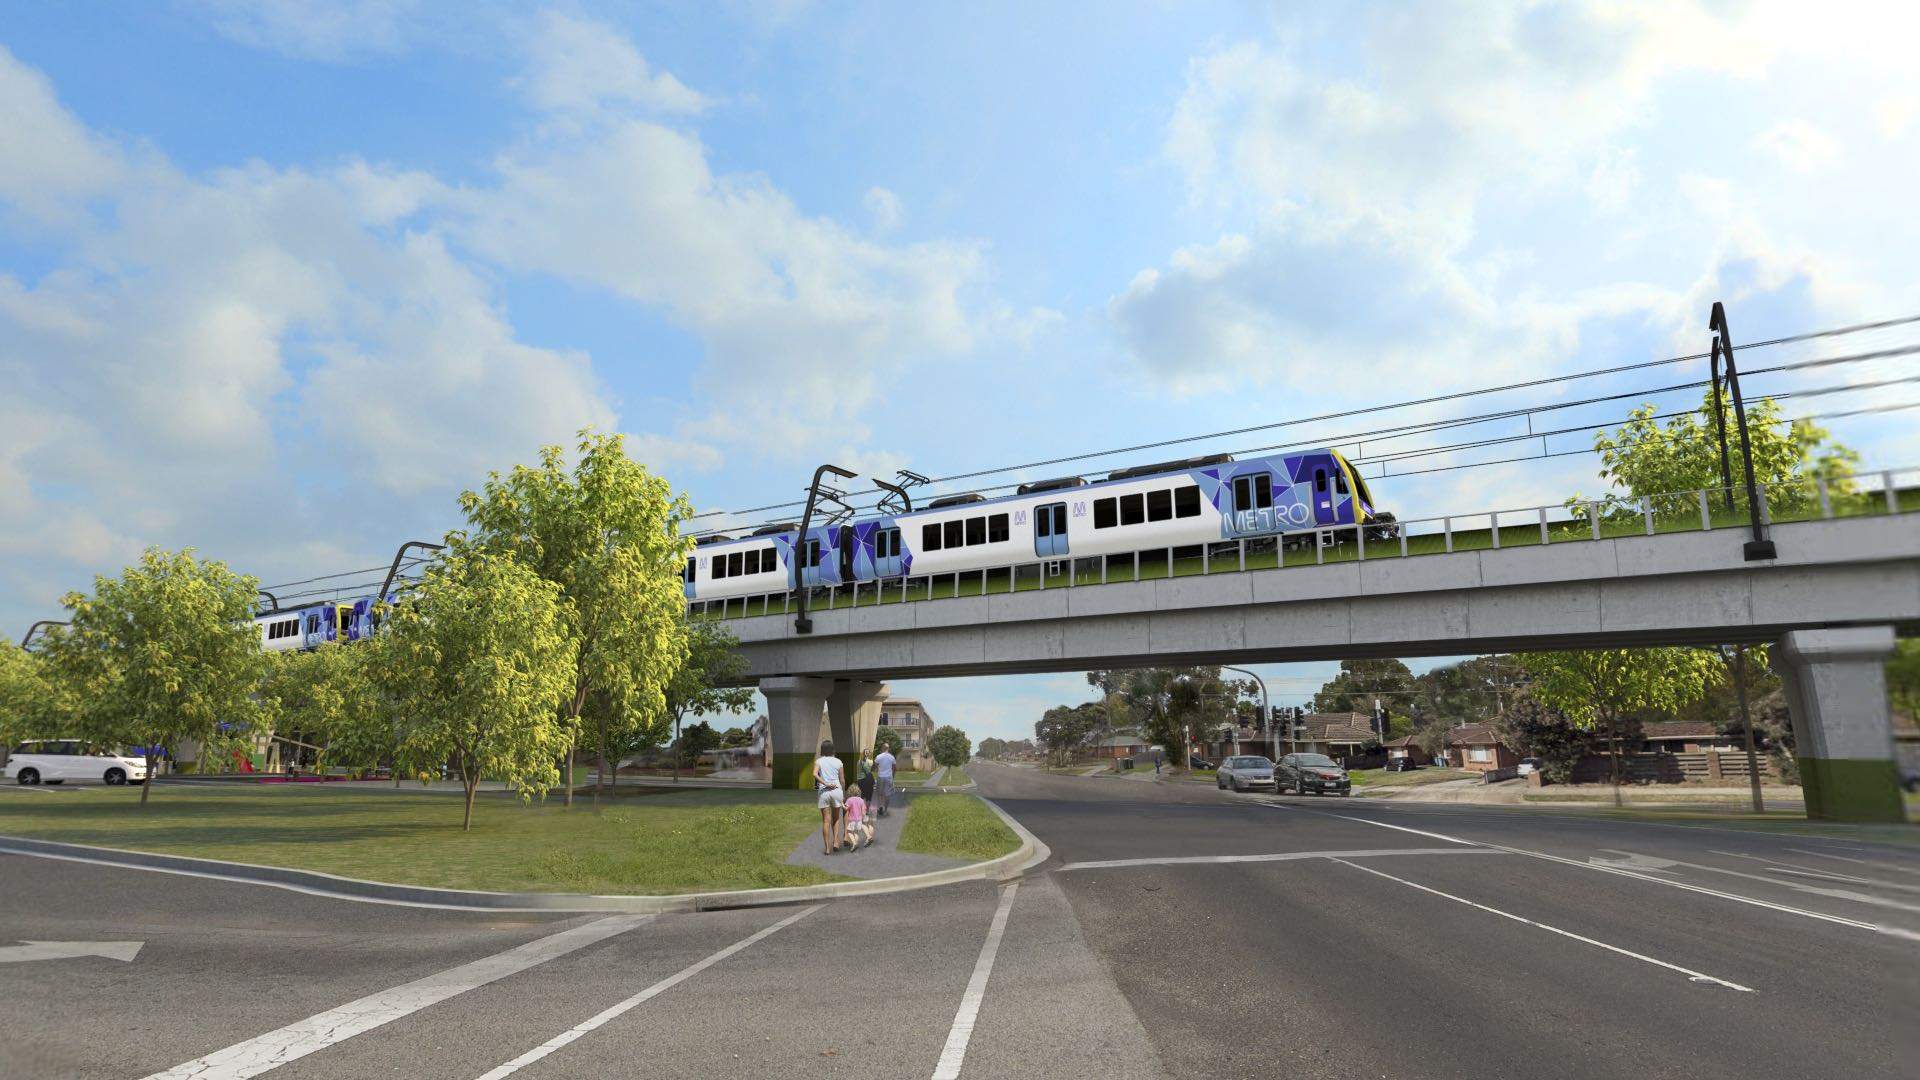 A New Elevated Train Line and Station Will Open in Melbourne This Week